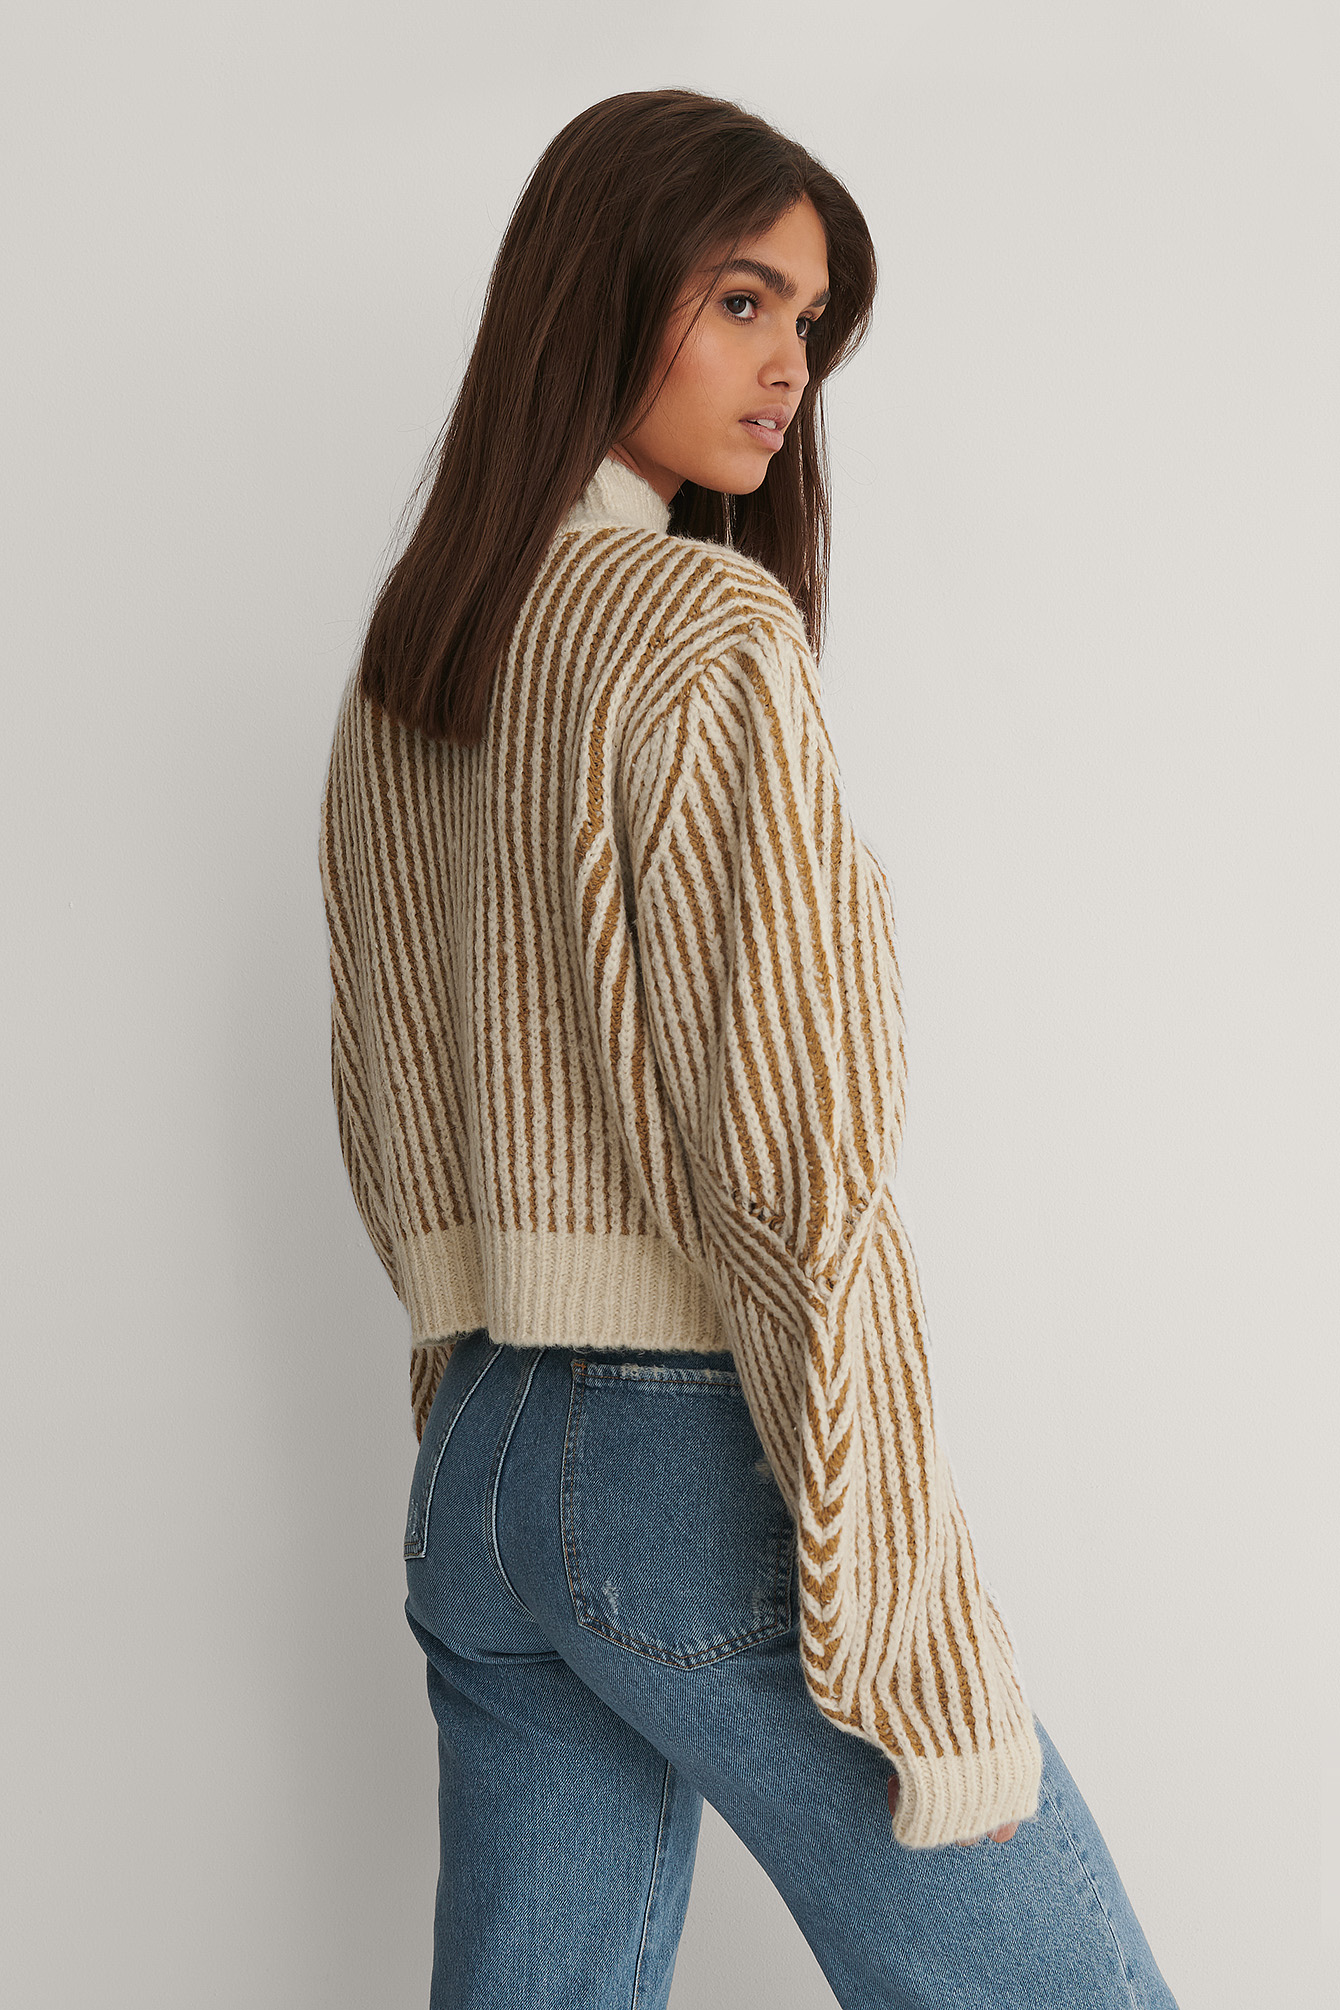 Beige/White Sleeve Detail Striped Knitted Sweater